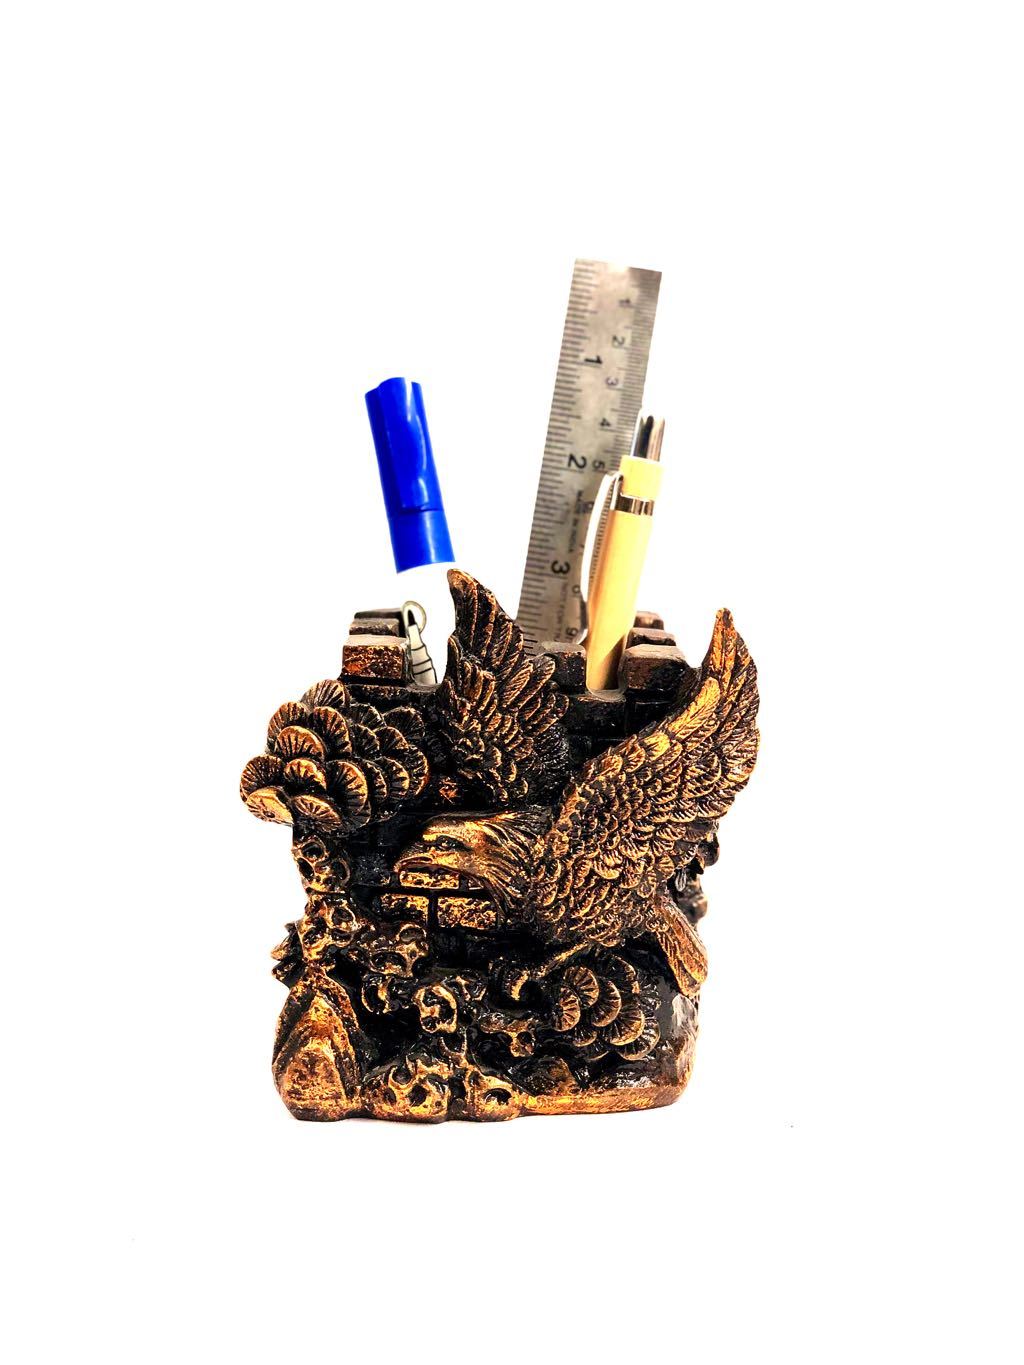 Eagle Style Resin Crafts Utility Pen Stand Excellent Quality By Tamrapatra